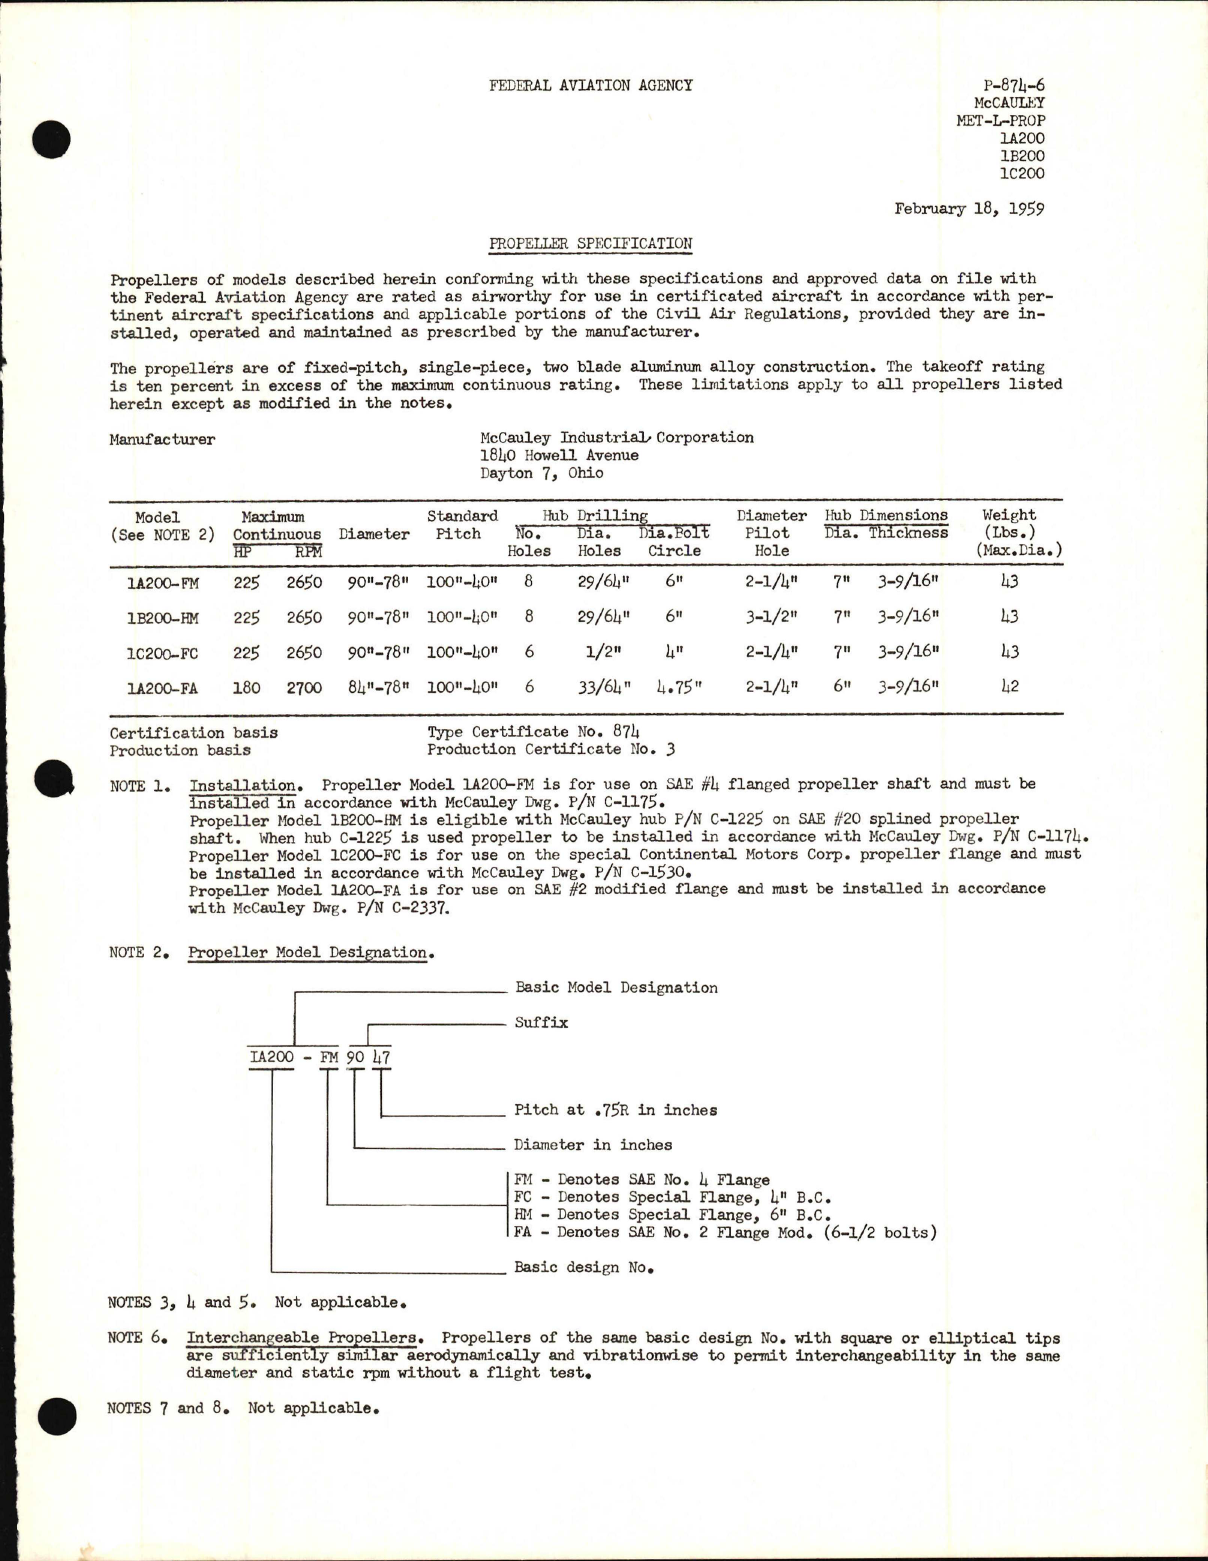 Sample page 1 from AirCorps Library document: 1A200, 1B200, and 1C200, MET-L-PROP